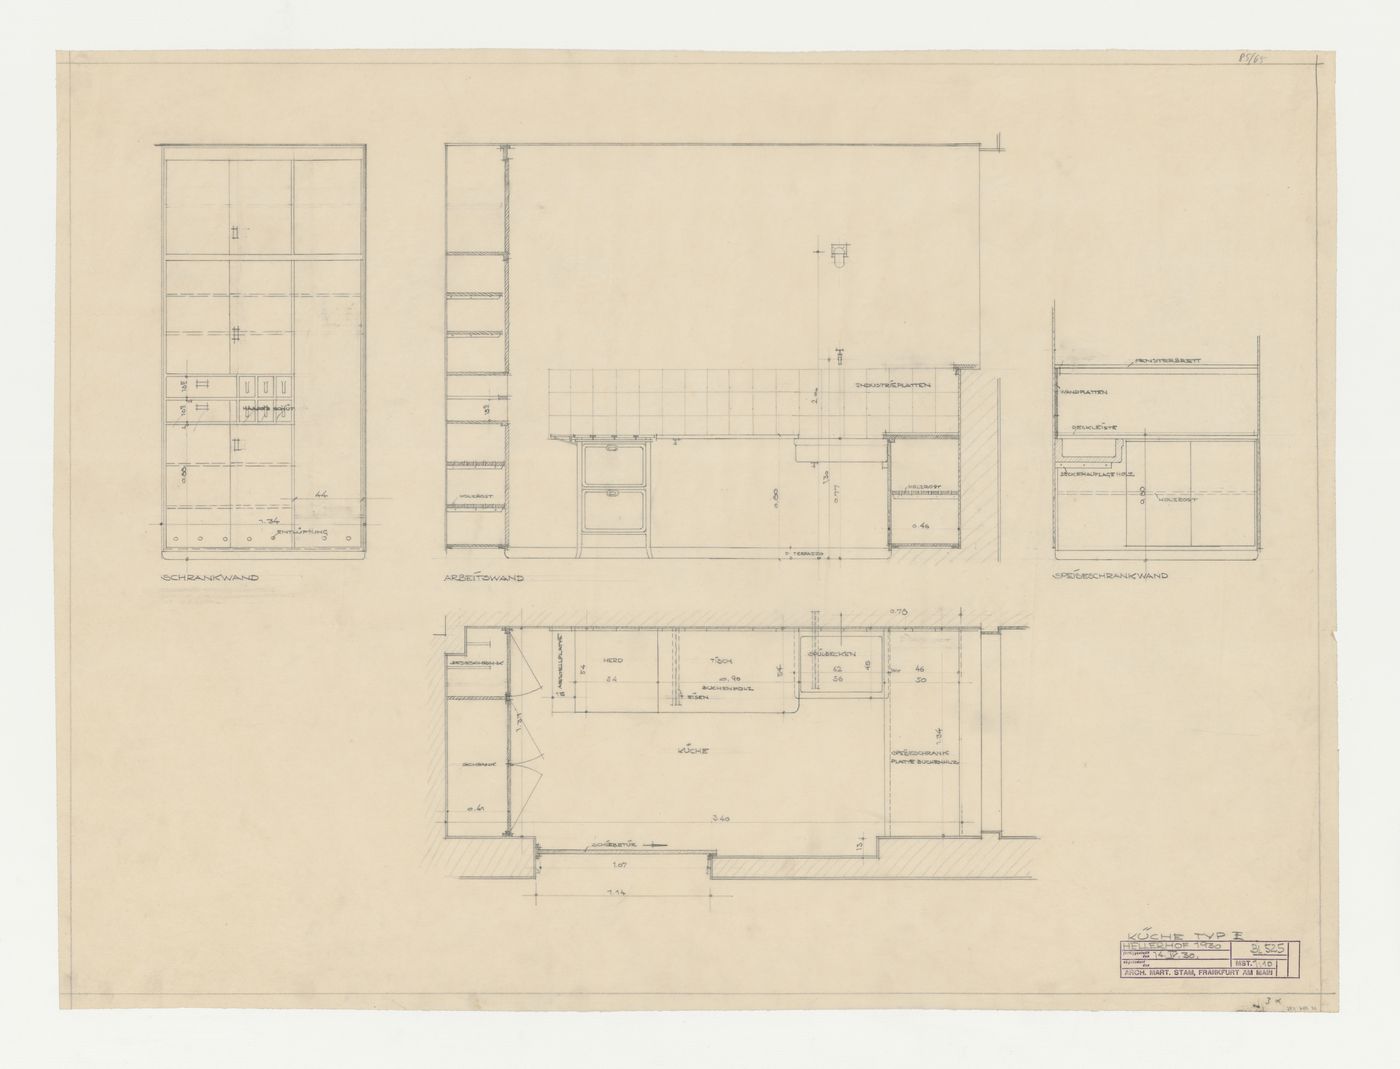 Plan and elevations for a type E kitchen, Hellerhof Housing Estate, Frankfurt am Main, Germany